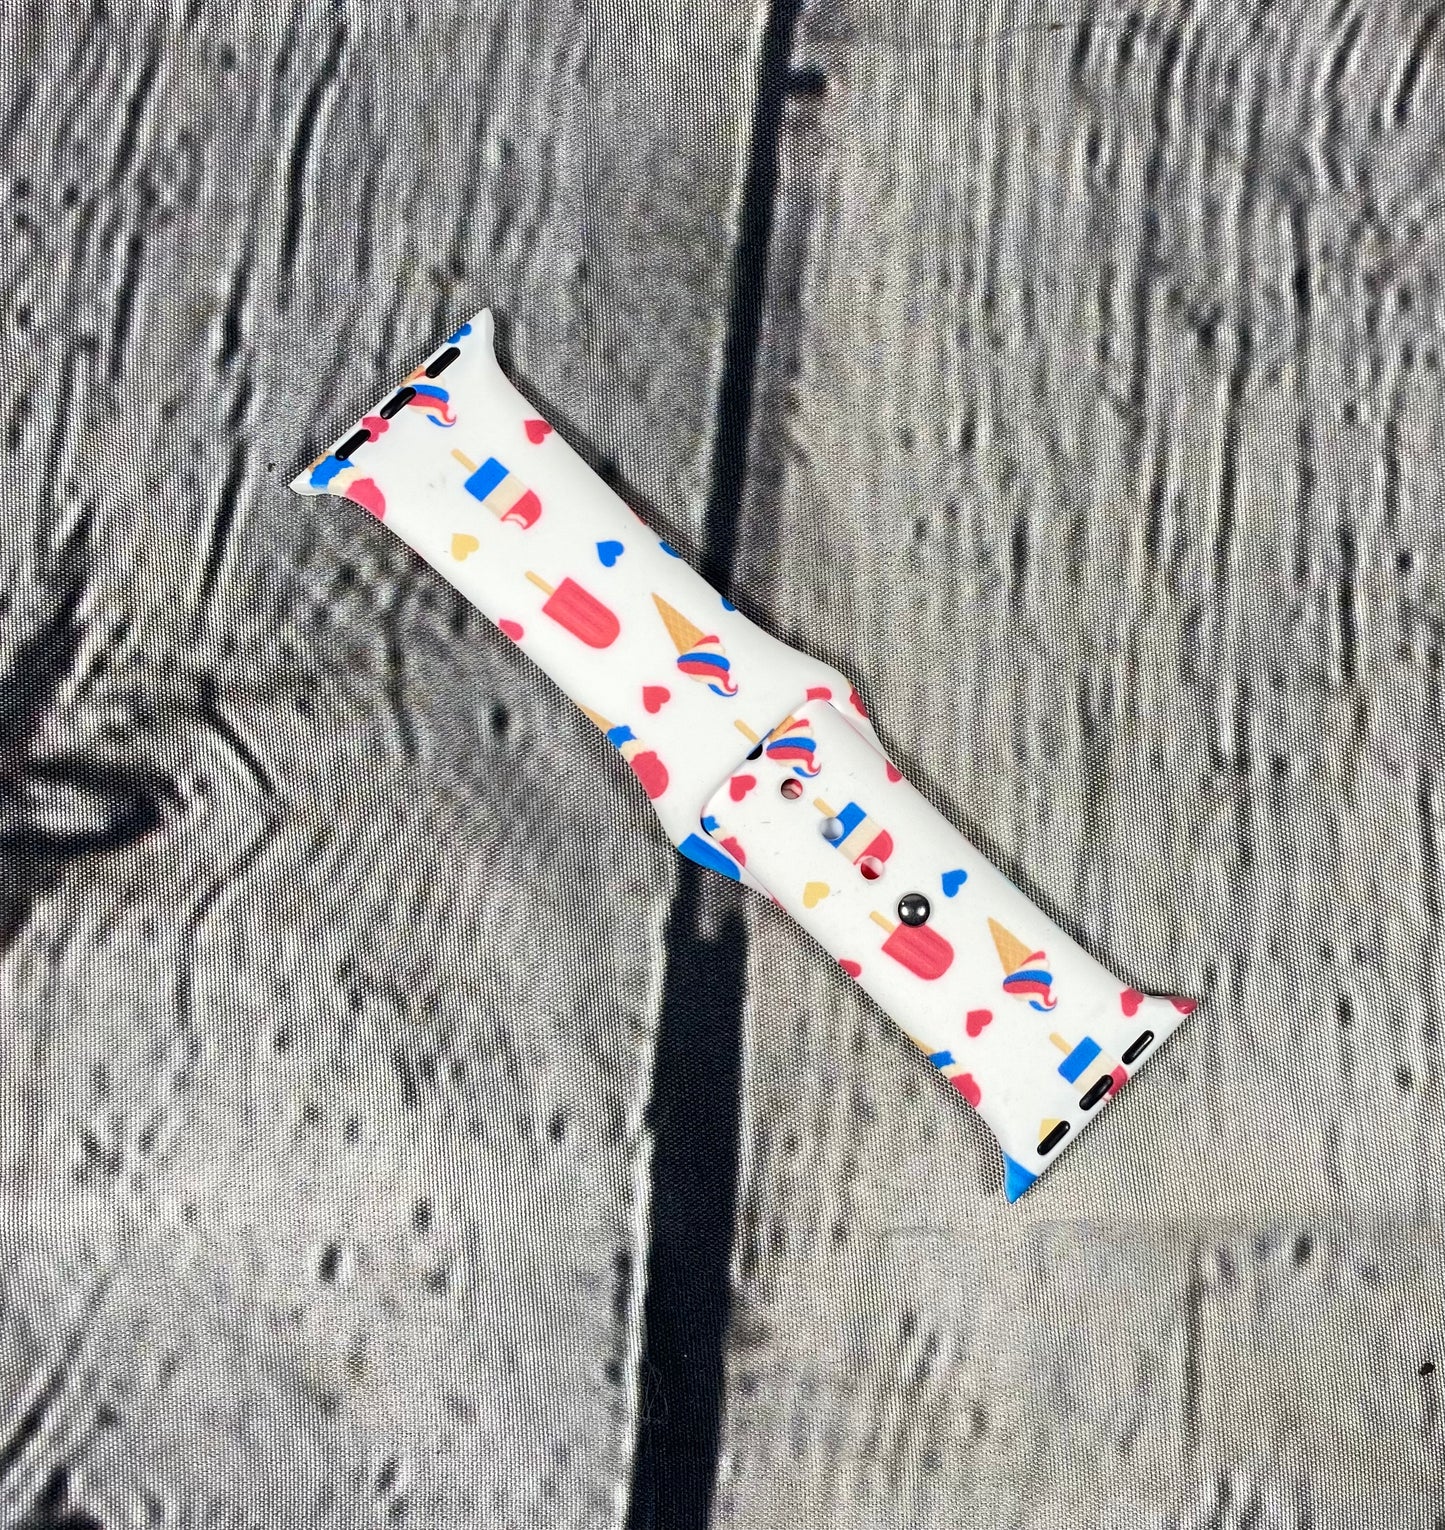 USA Popsicle Apple Watch Band